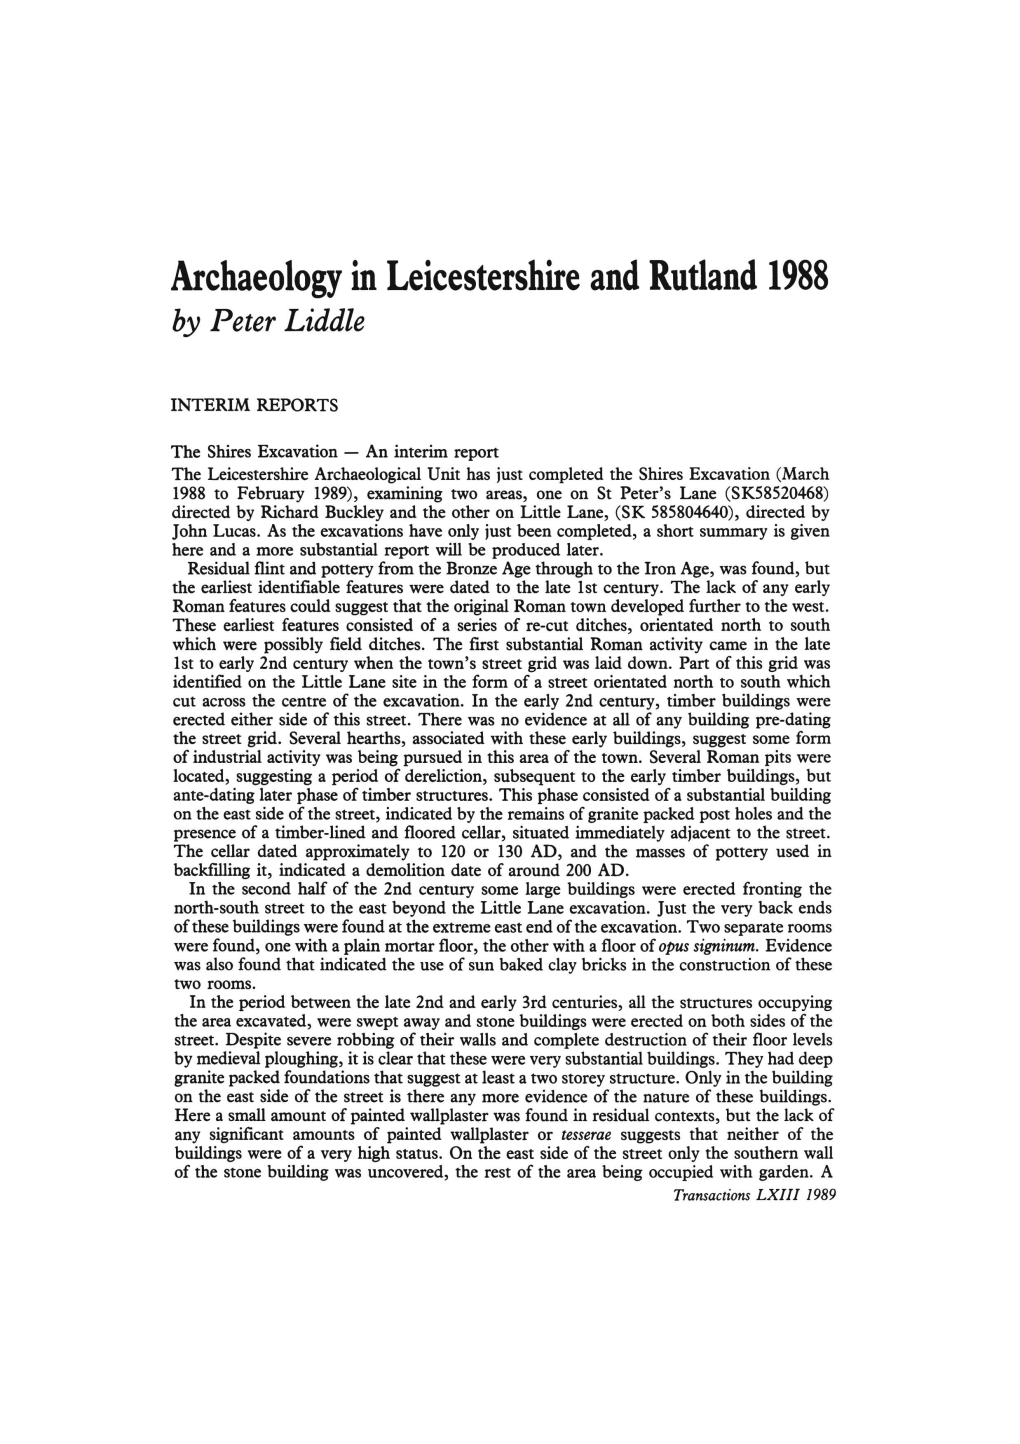 Archaeology in Leicestershire and Rutland 1988 by Peter Liddle